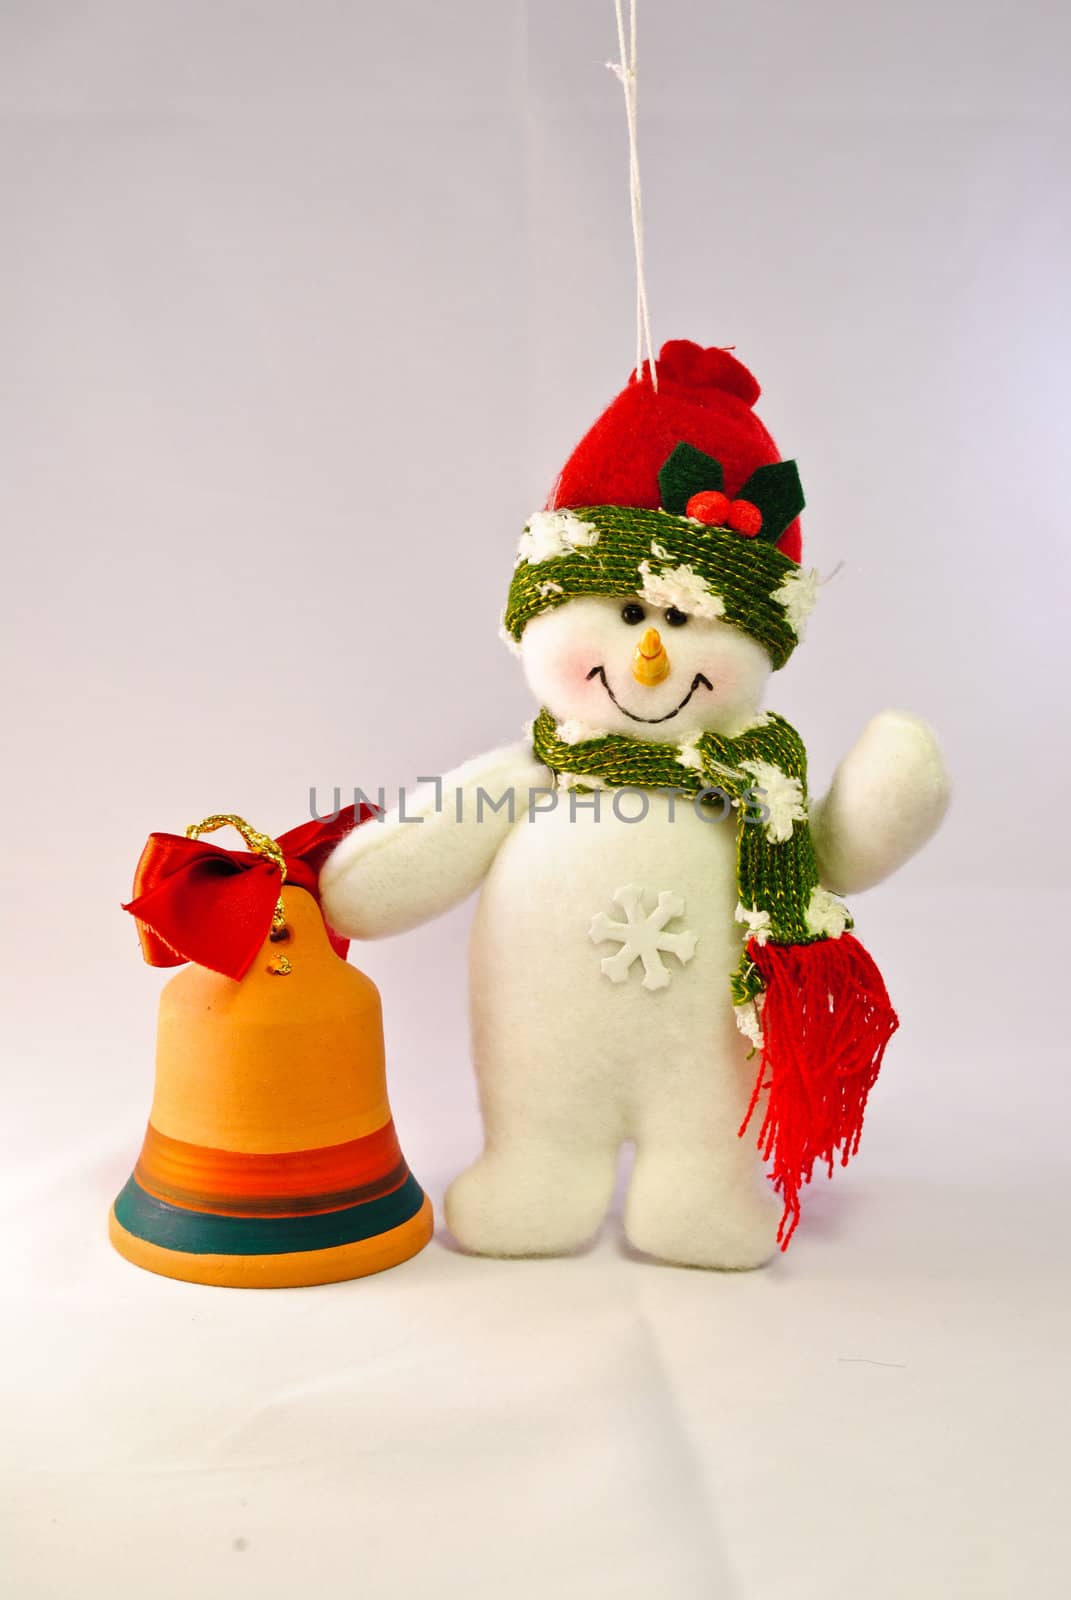 Toy snowman with orange bell and red ribbon hanged on a string